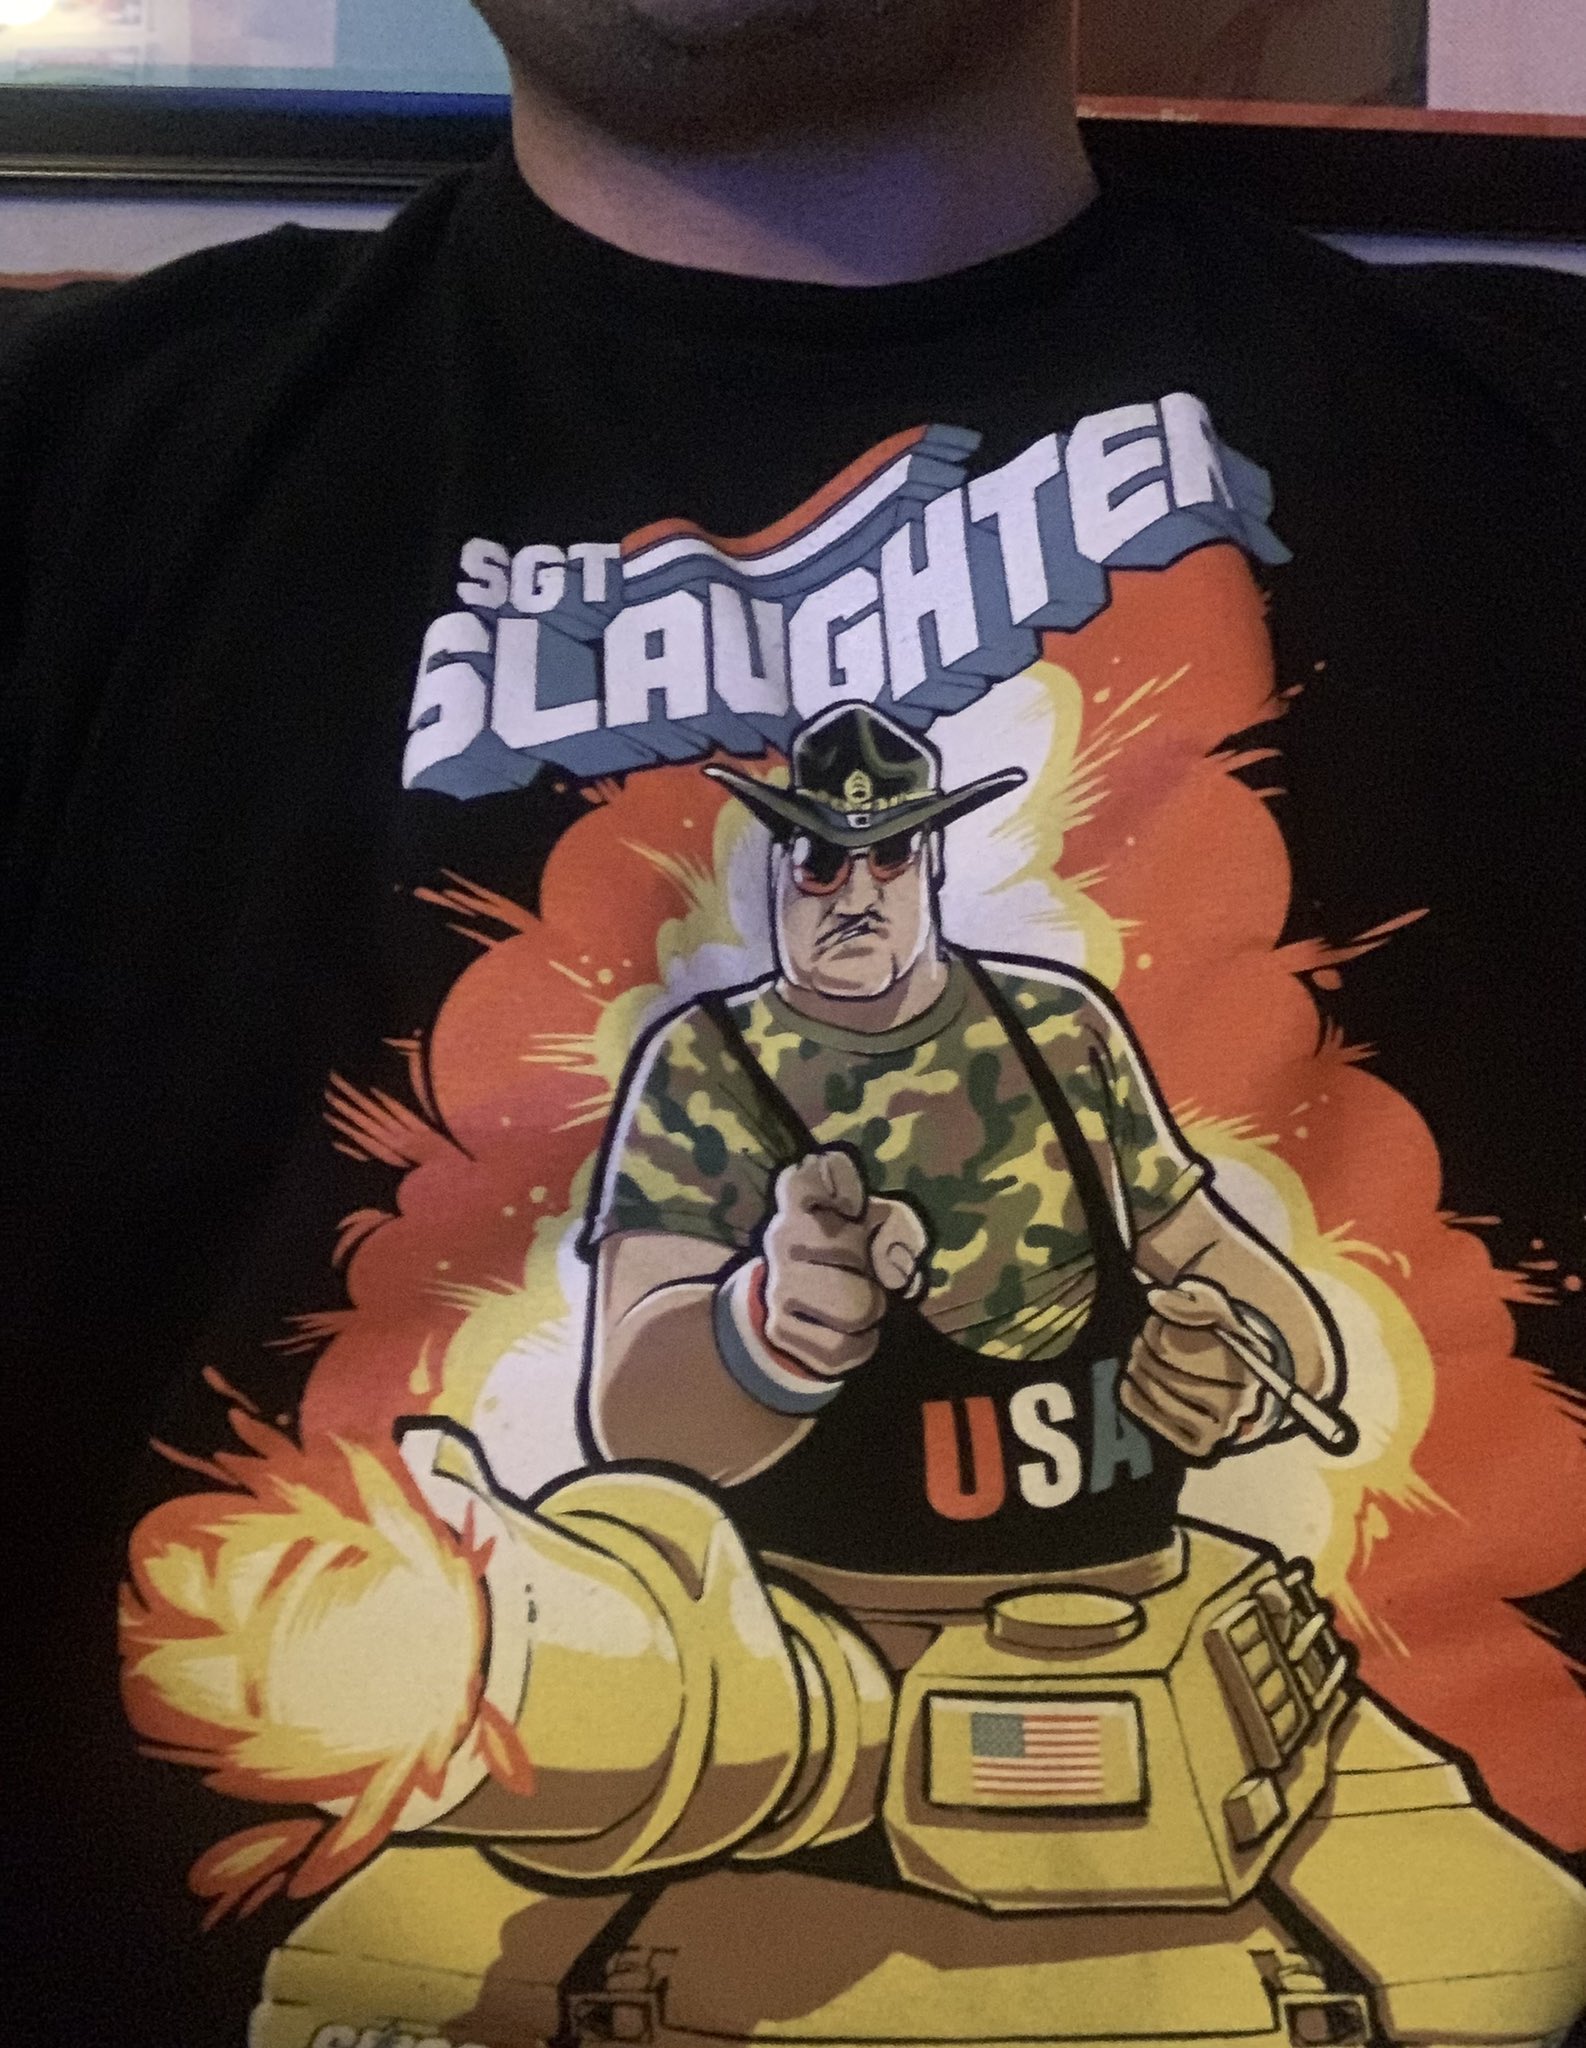  Attention!!! Happy Birthday Sgt Slaughter! I just happen to be wearing one of your tees today! 